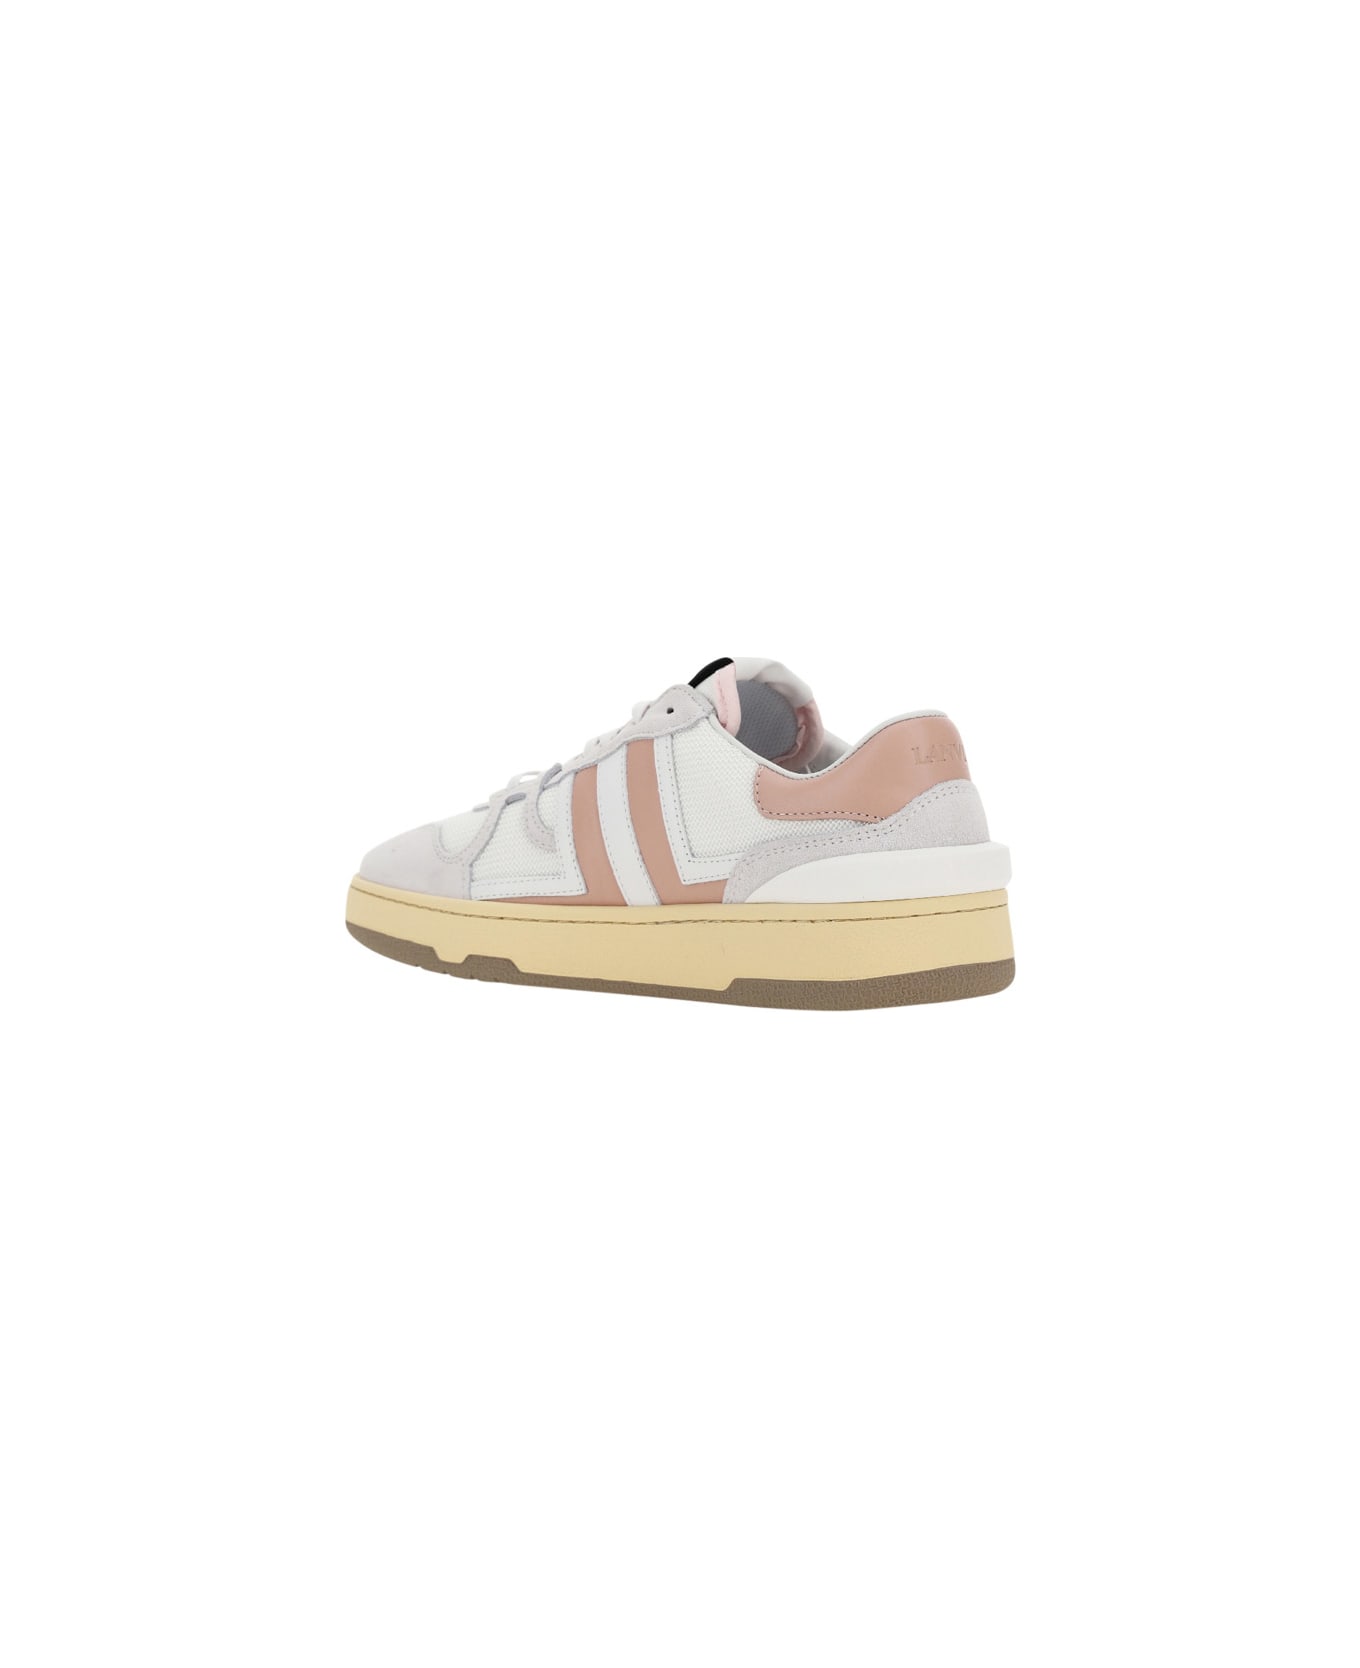 Lanvin Clay Sneakers - White/nude スニーカー